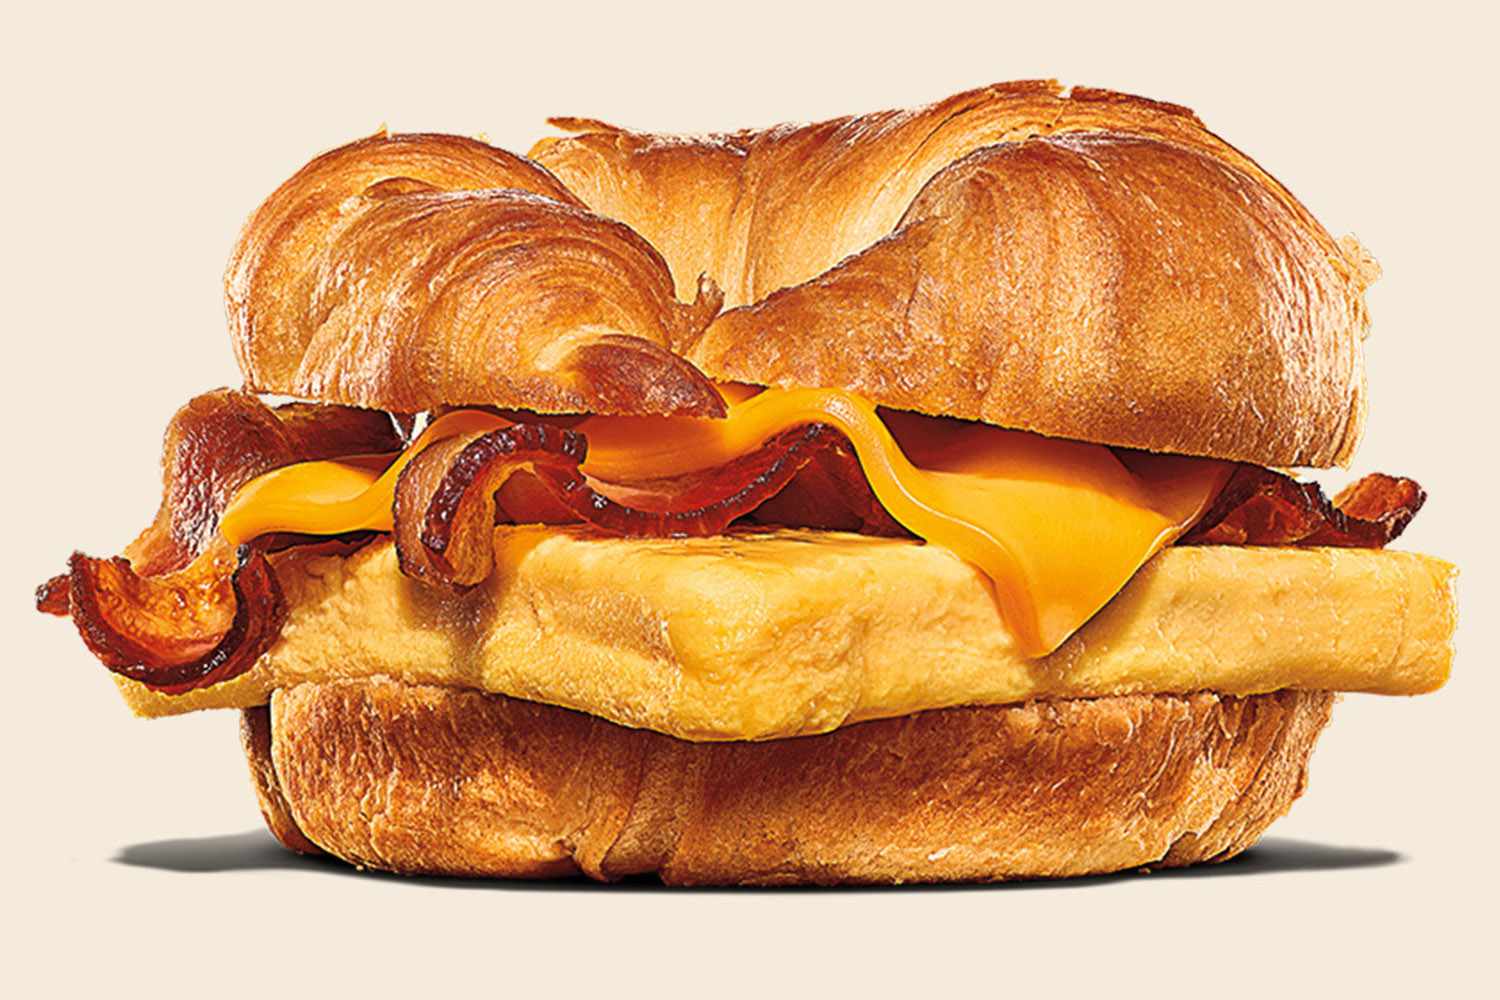 <a>Burger King Burger King's croissan'wich is available for 1 cent on Jan. 30</a>